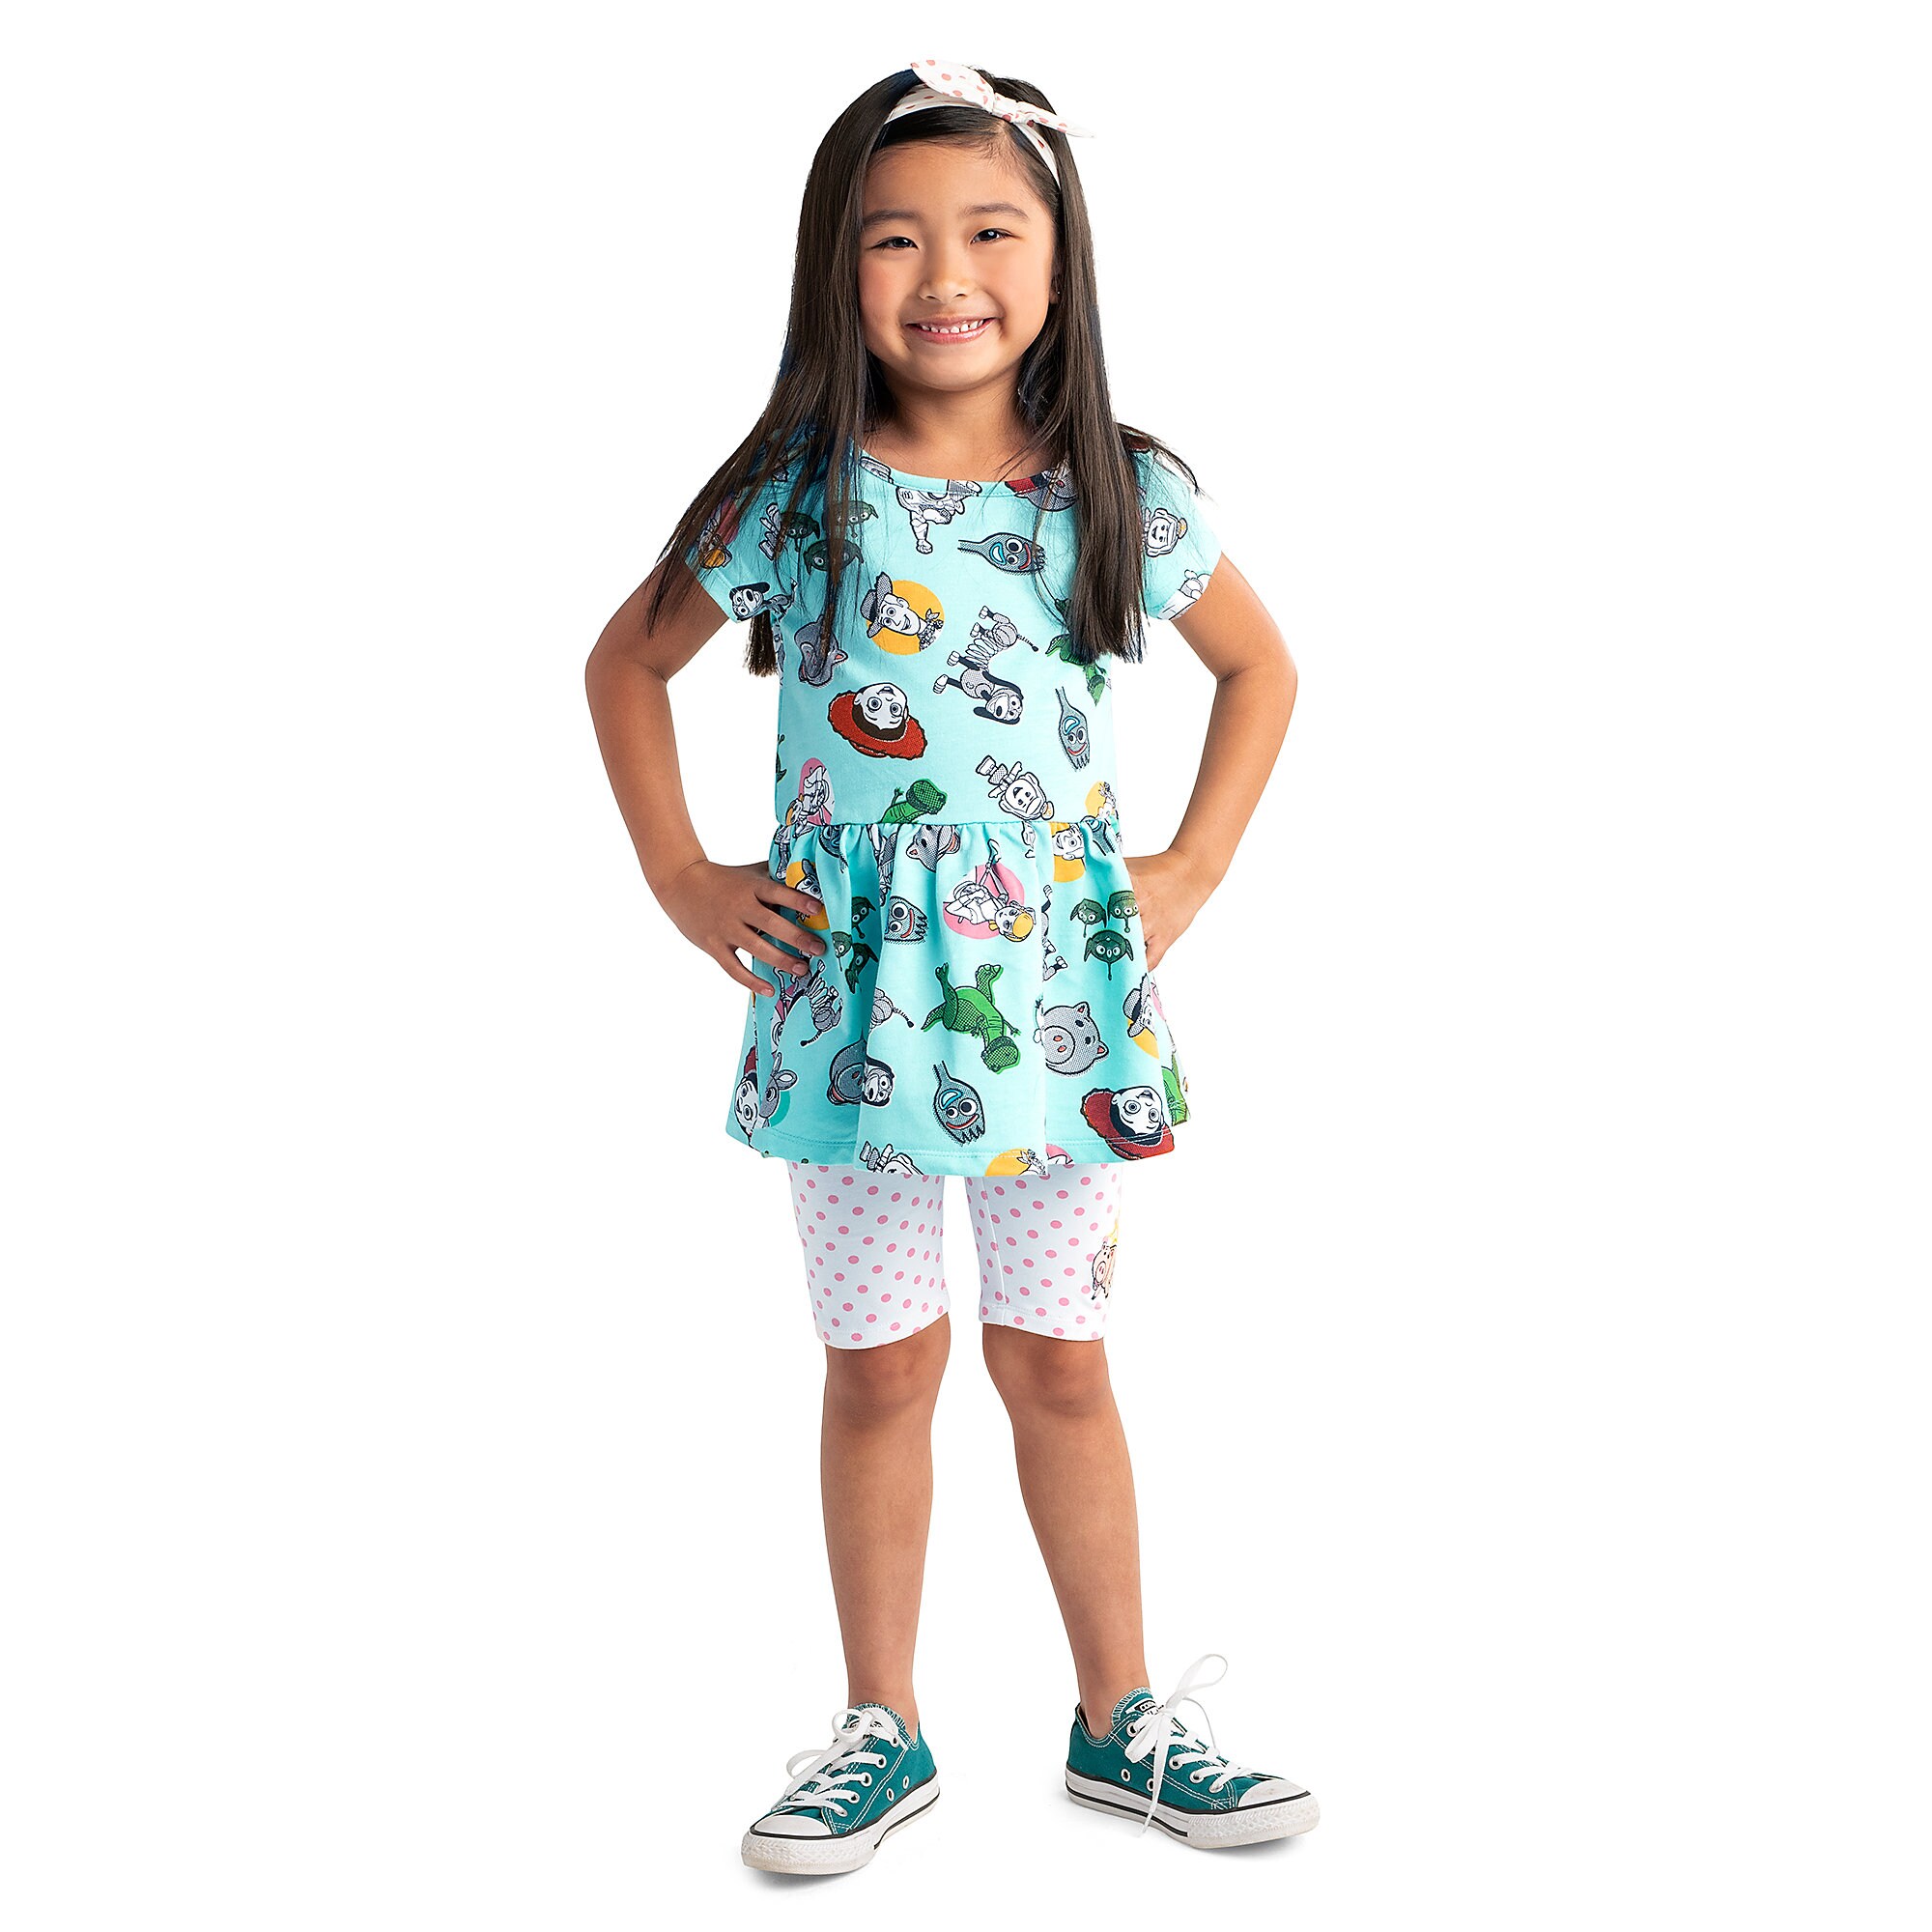 Toy Story 4 Knit Top and Shorts Set for Girls